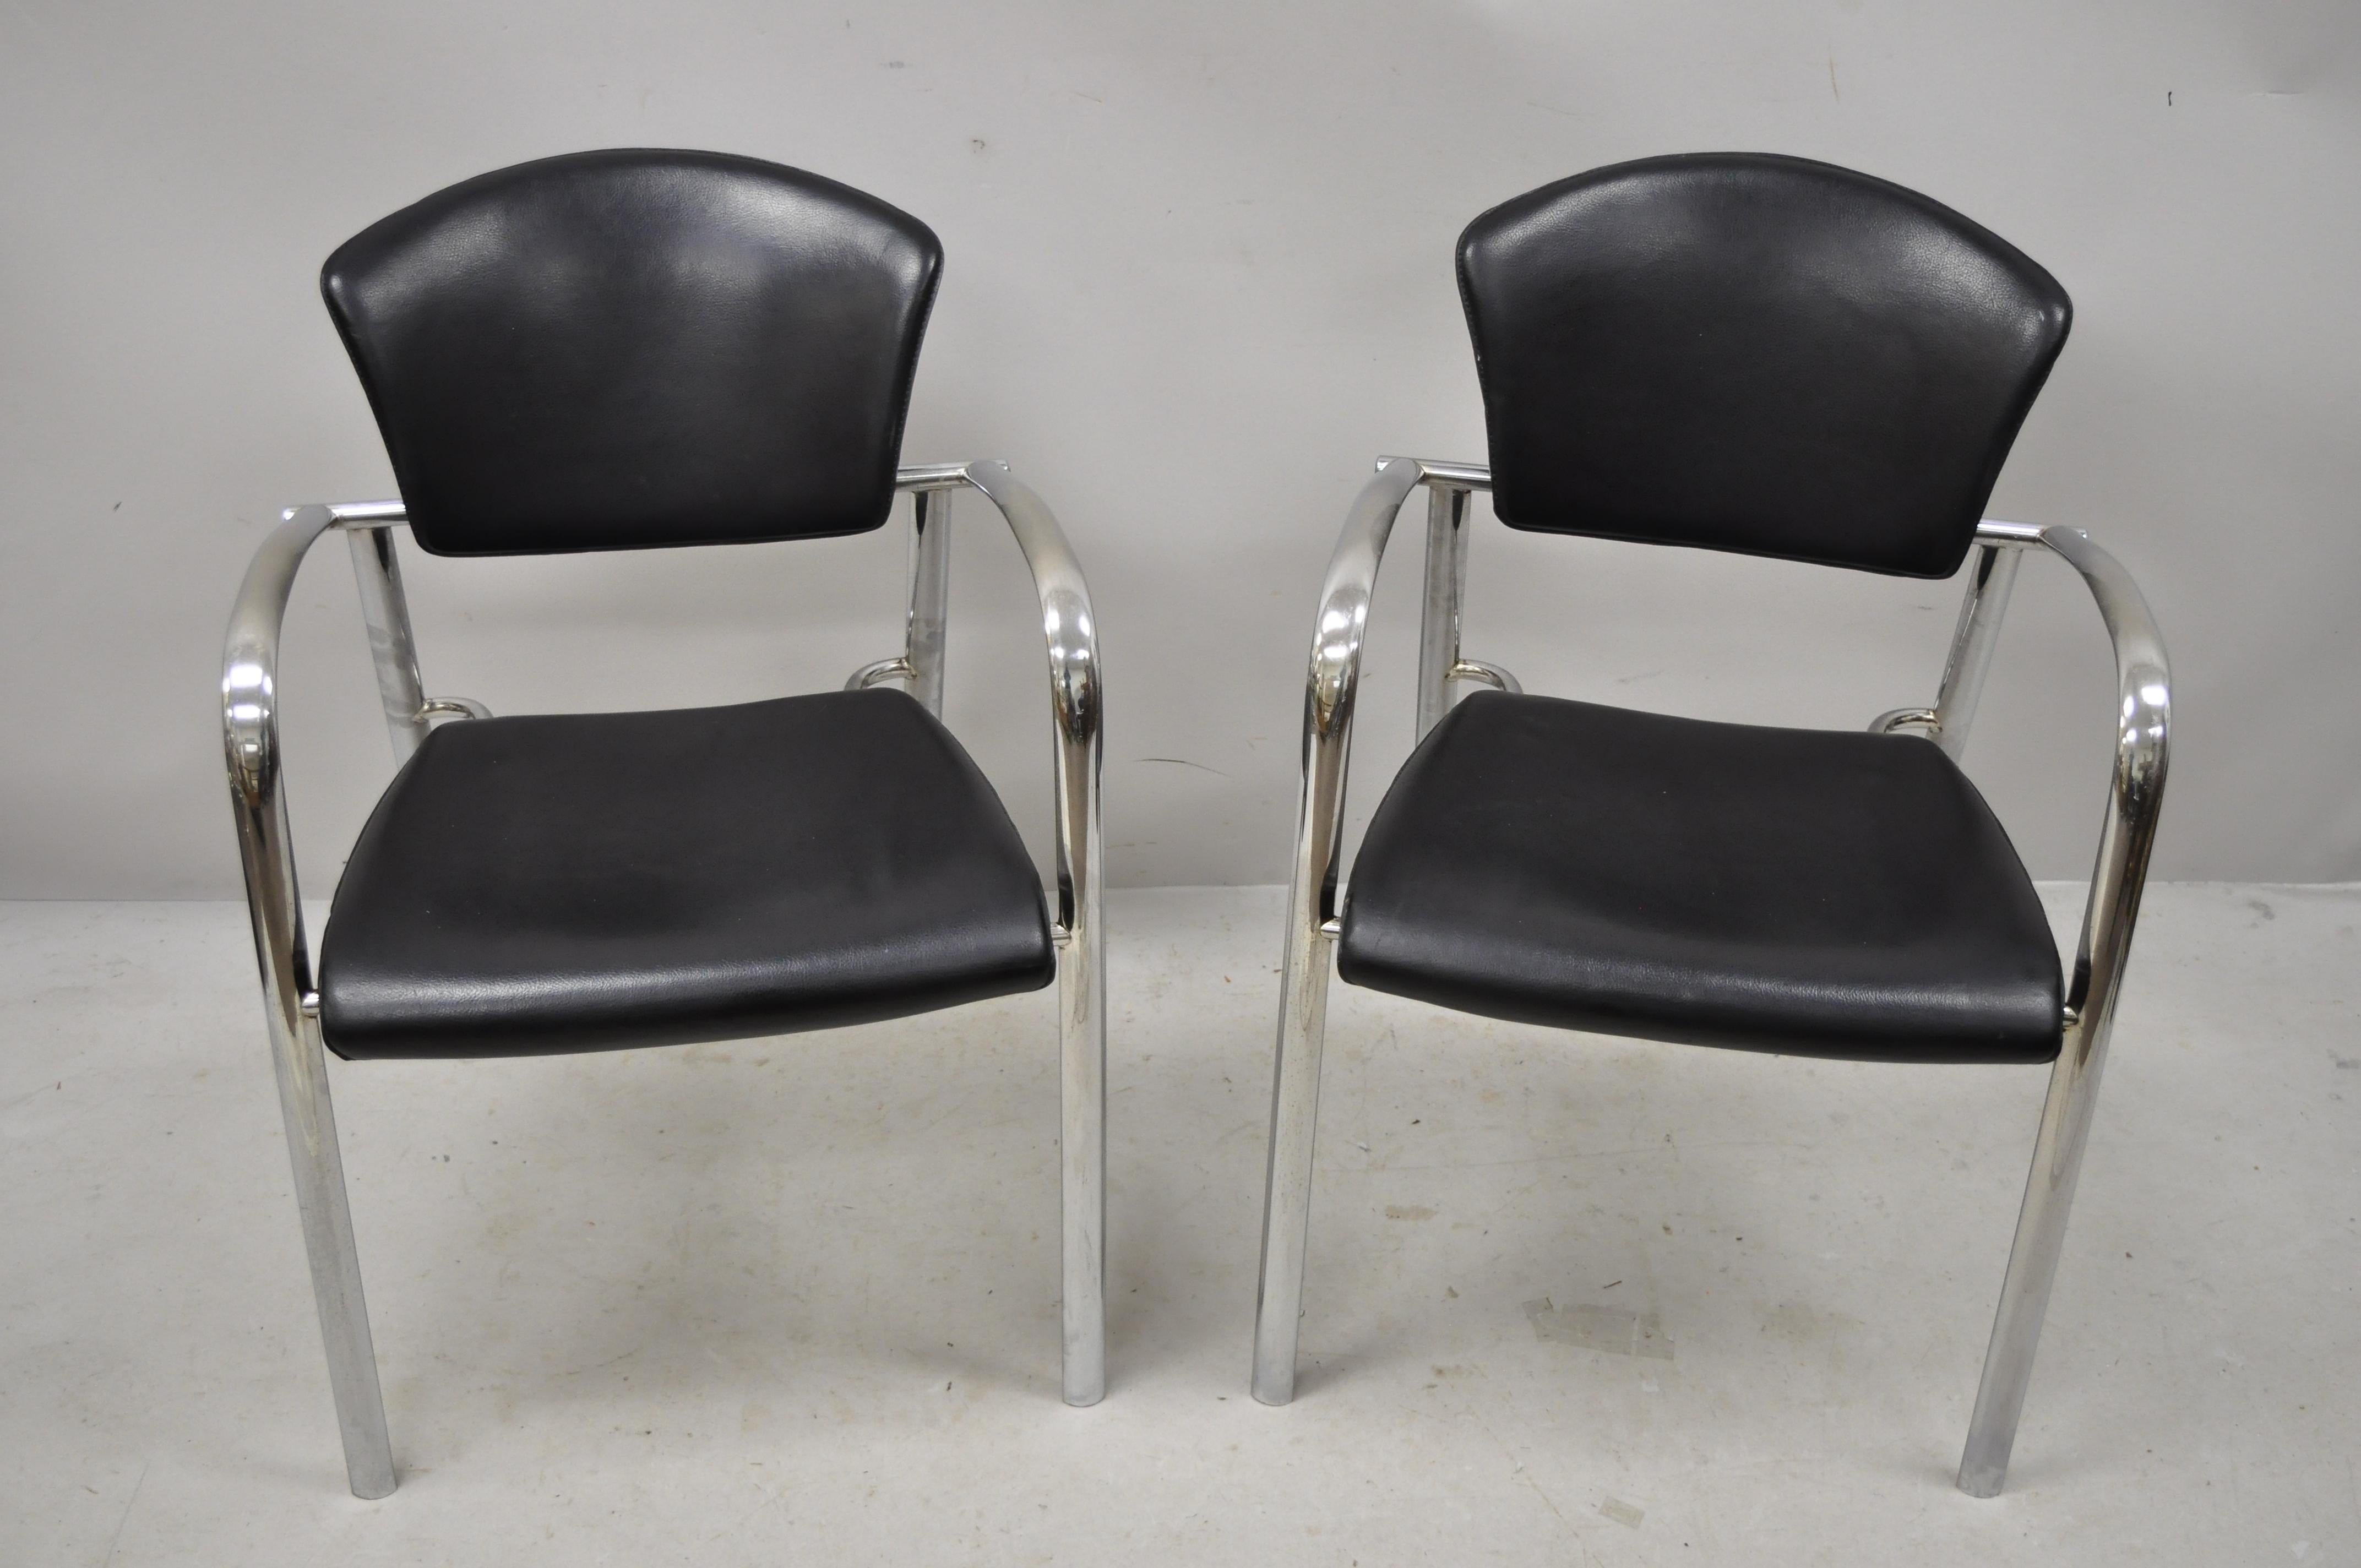 Vintage Italian Mid-Century Modern chrome sleek sculptural armchairs, a pair. Item features black stitched leather wrapped frames, chrome frames, very nice vintage item, quality Italian craftsmanship, sleek sculptural form, circa mid to late 20th